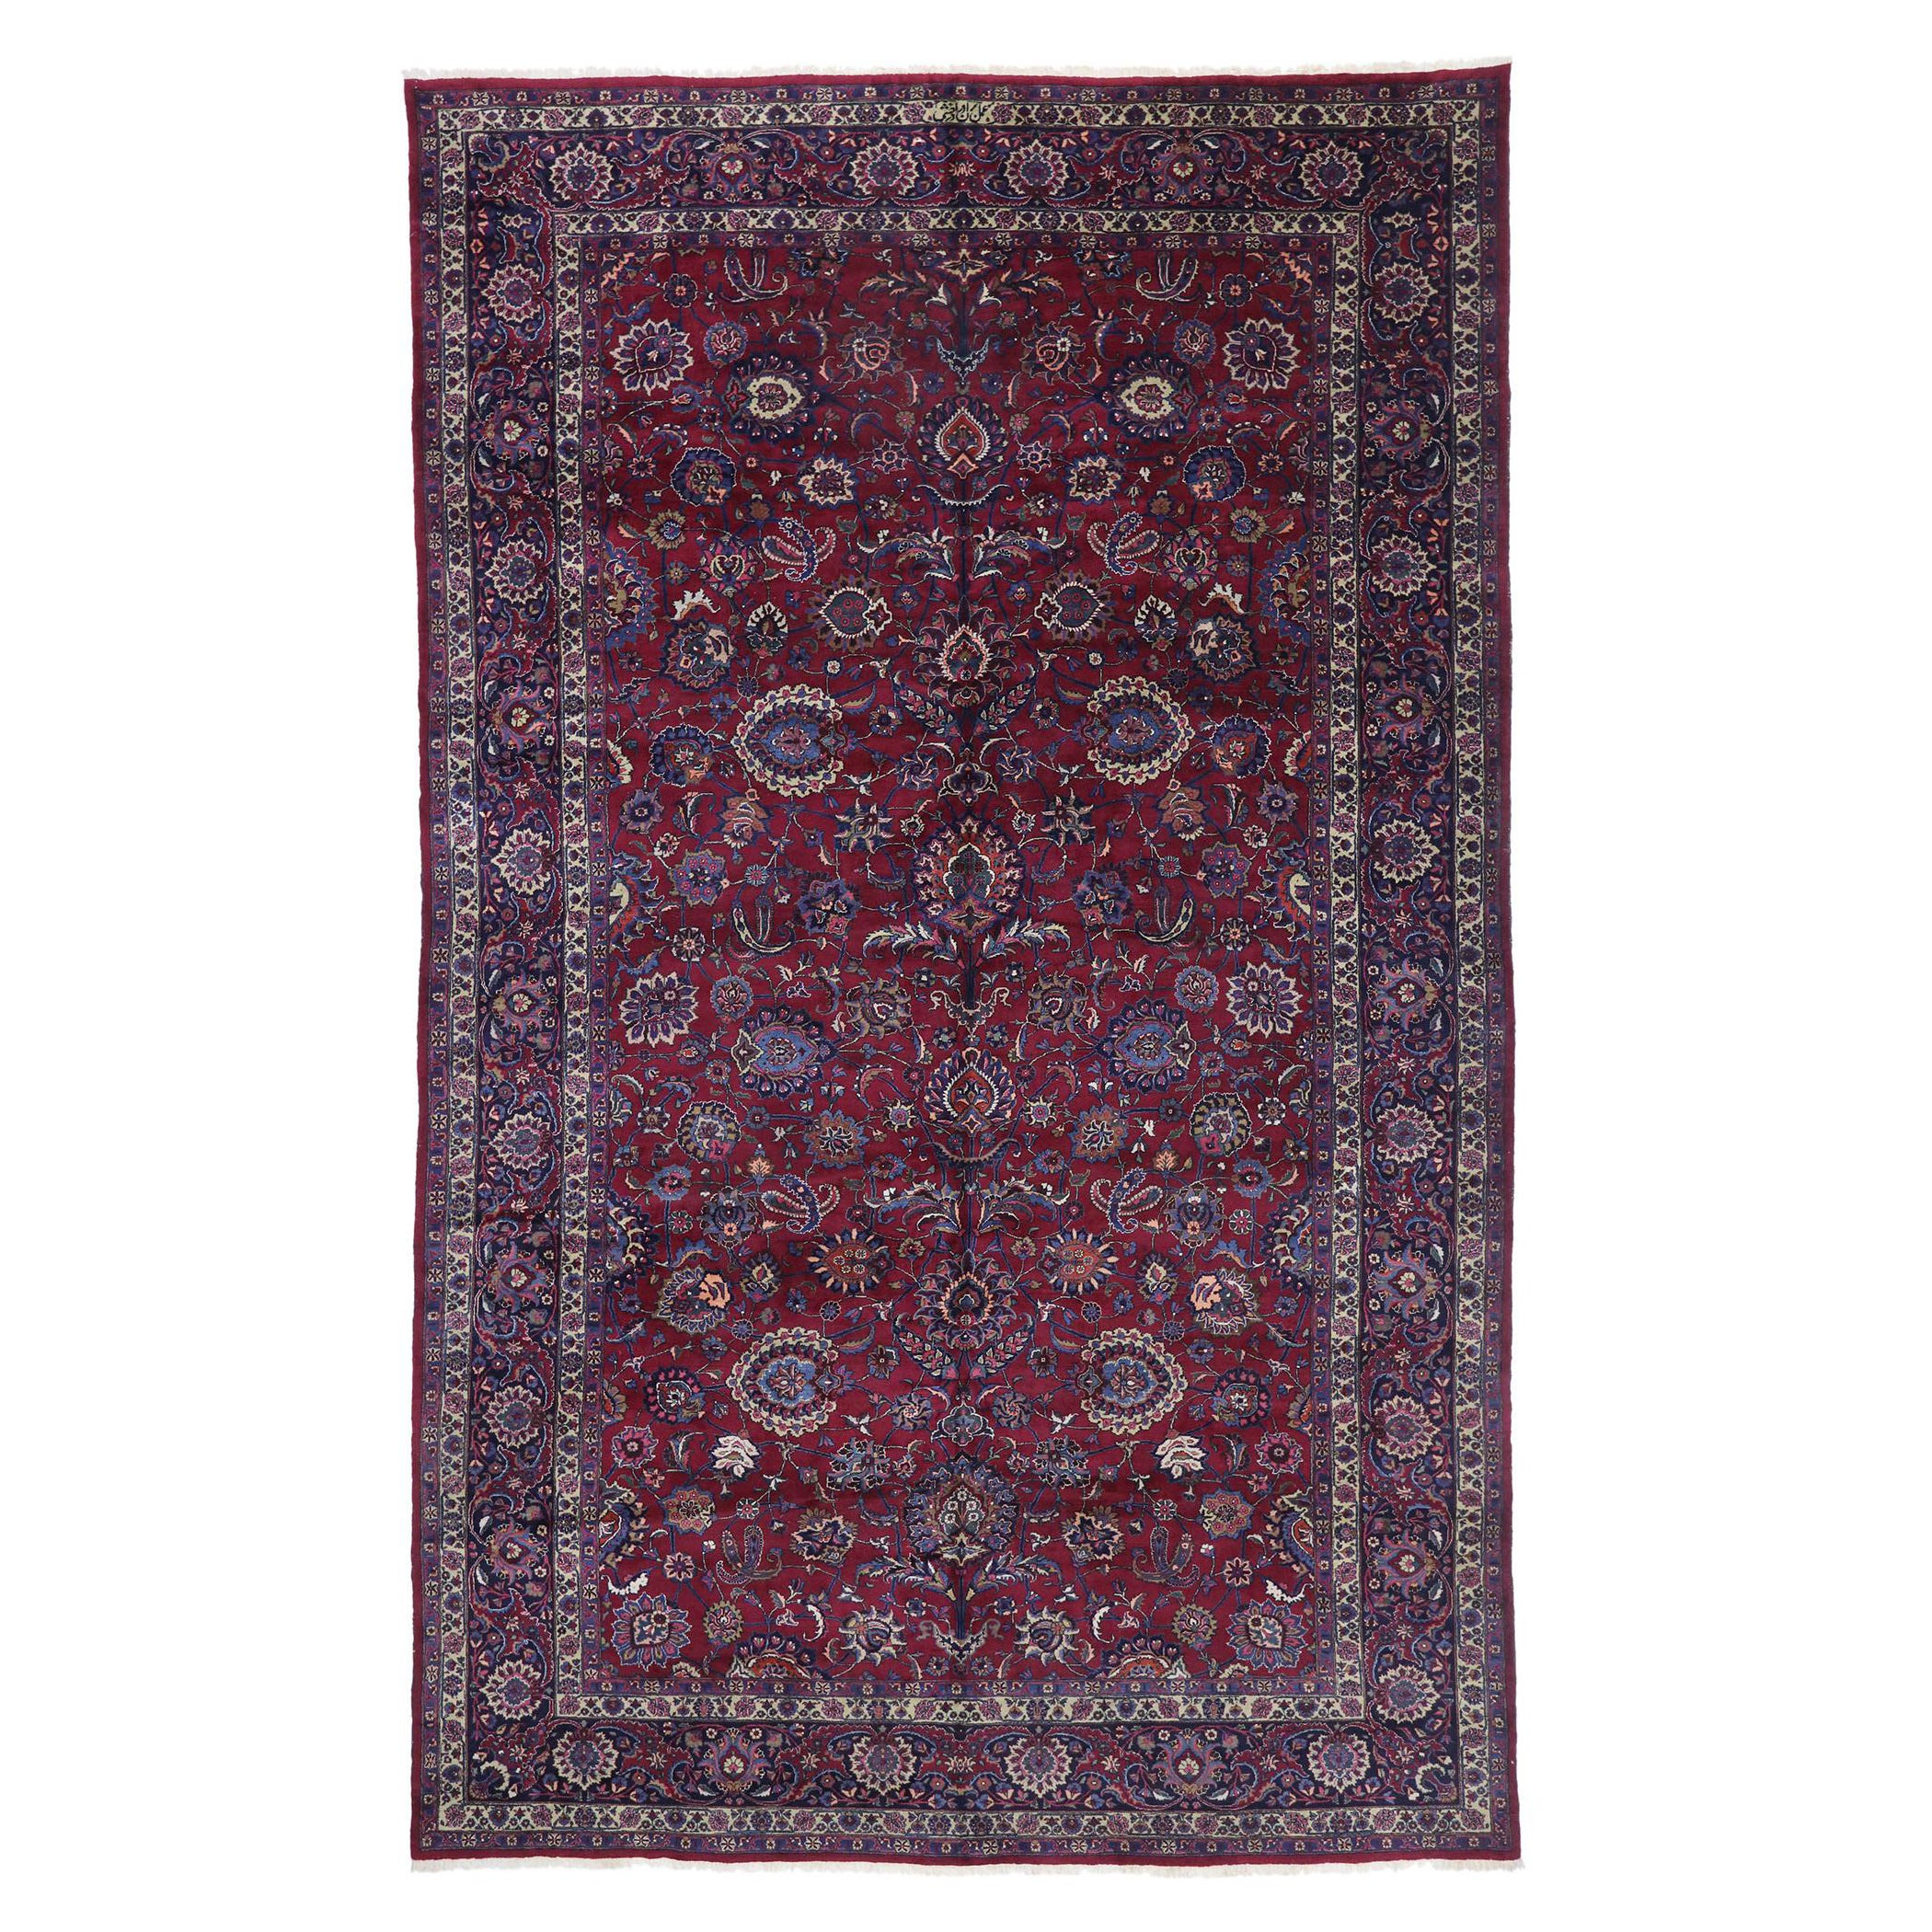 Victorian Persian Rugs